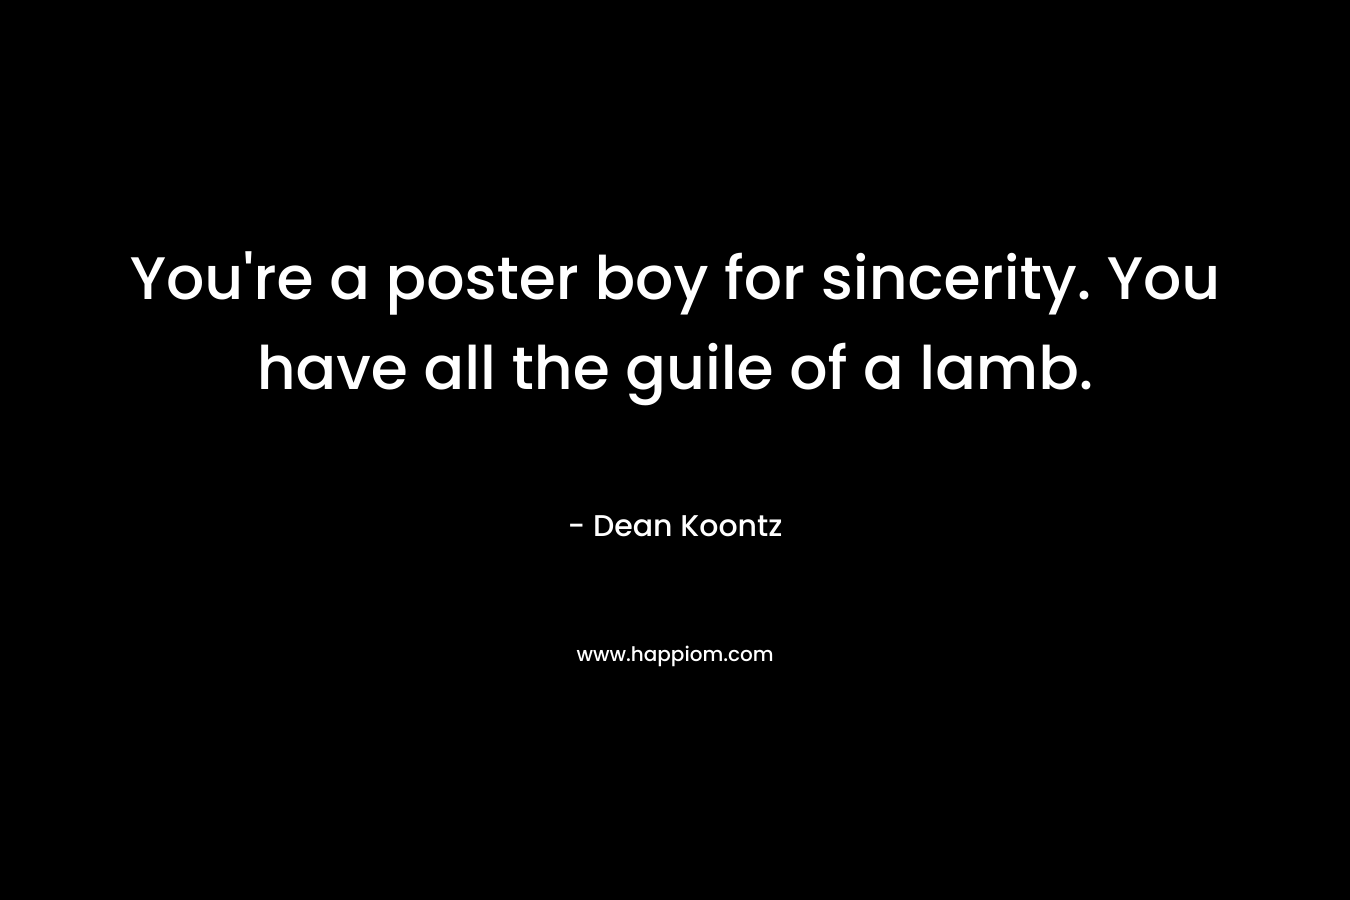 You’re a poster boy for sincerity. You have all the guile of a lamb. – Dean Koontz